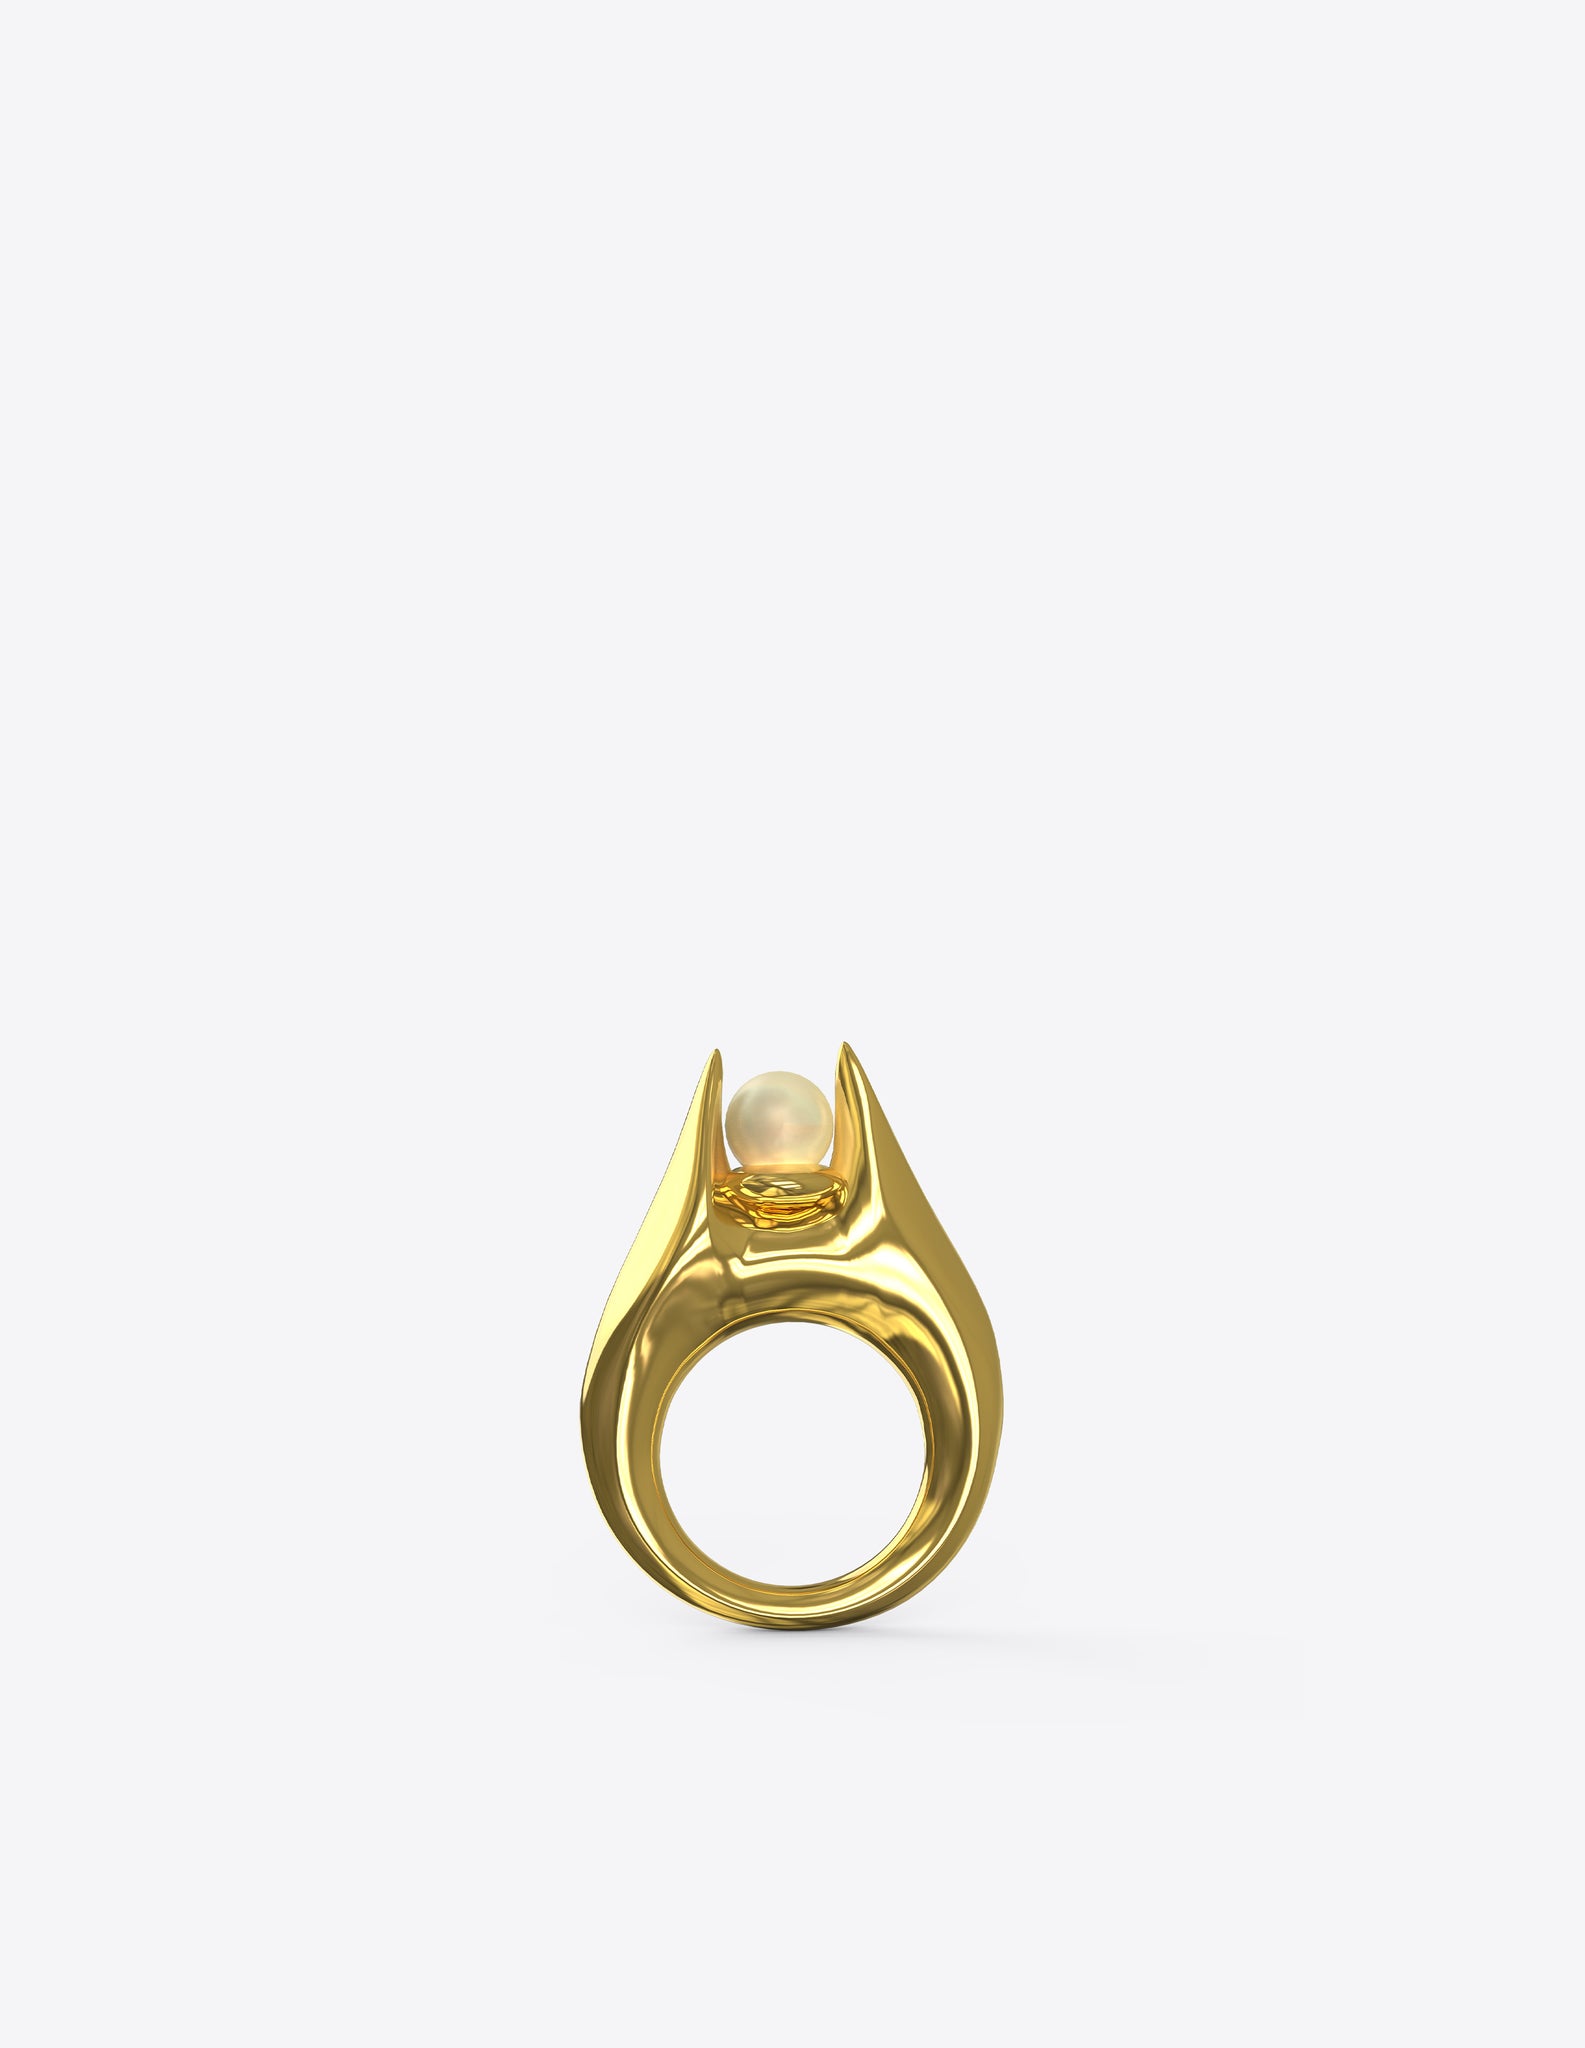 Orb Protection Ring with Pearl in Polished 18K Gold Vermeil